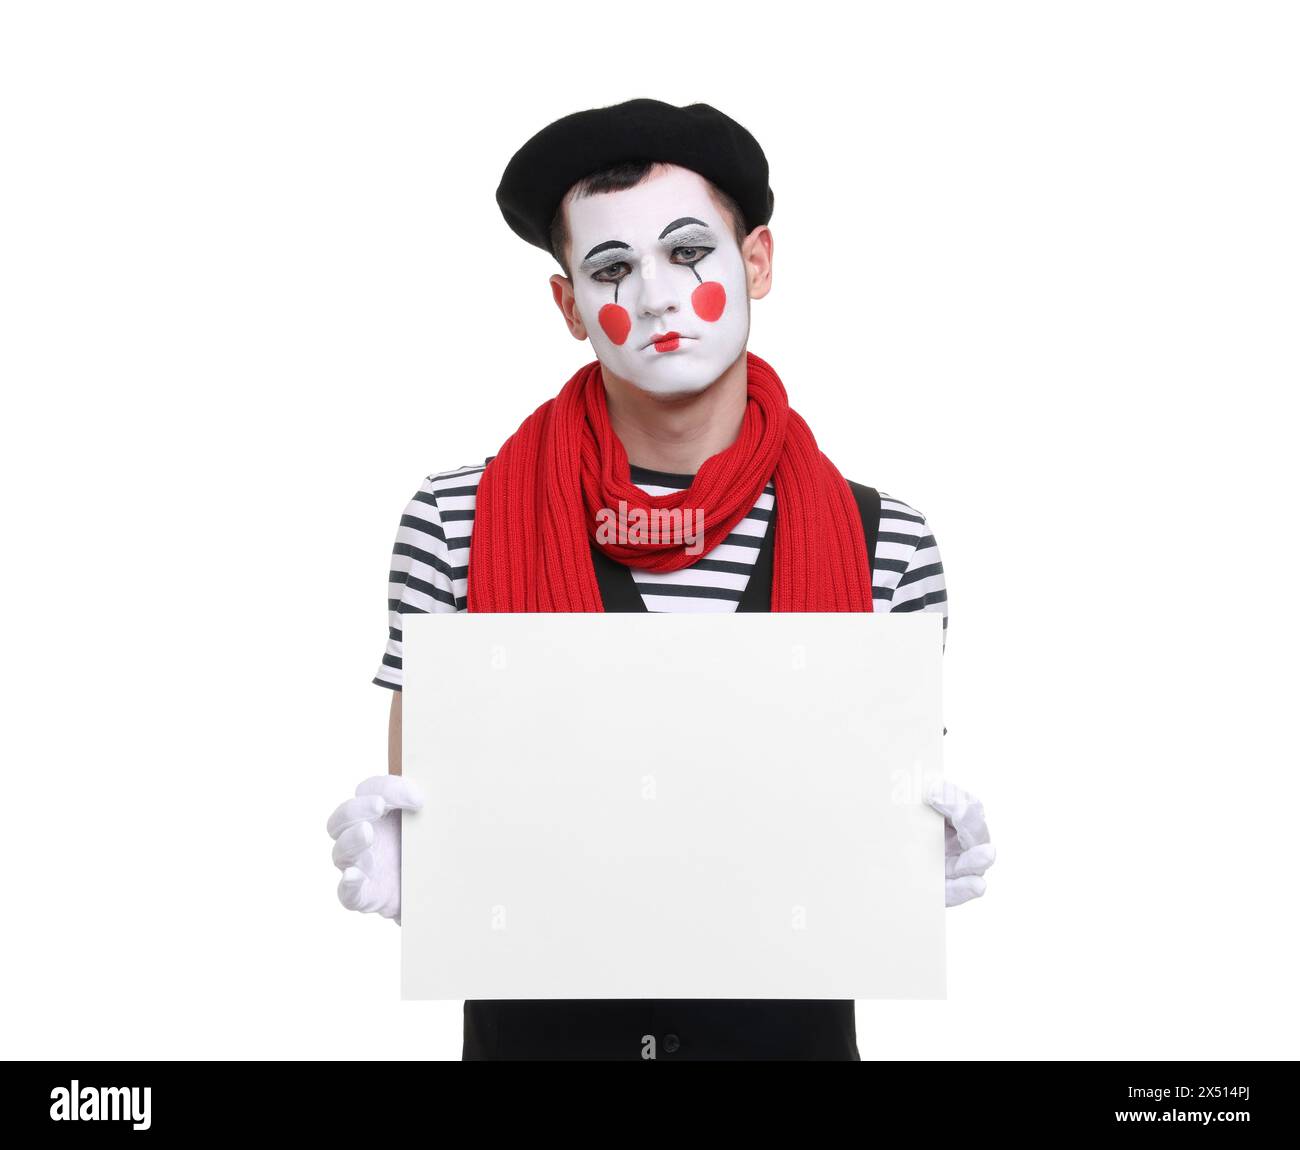 Sad mime artist with blank sign on white background Stock Photo